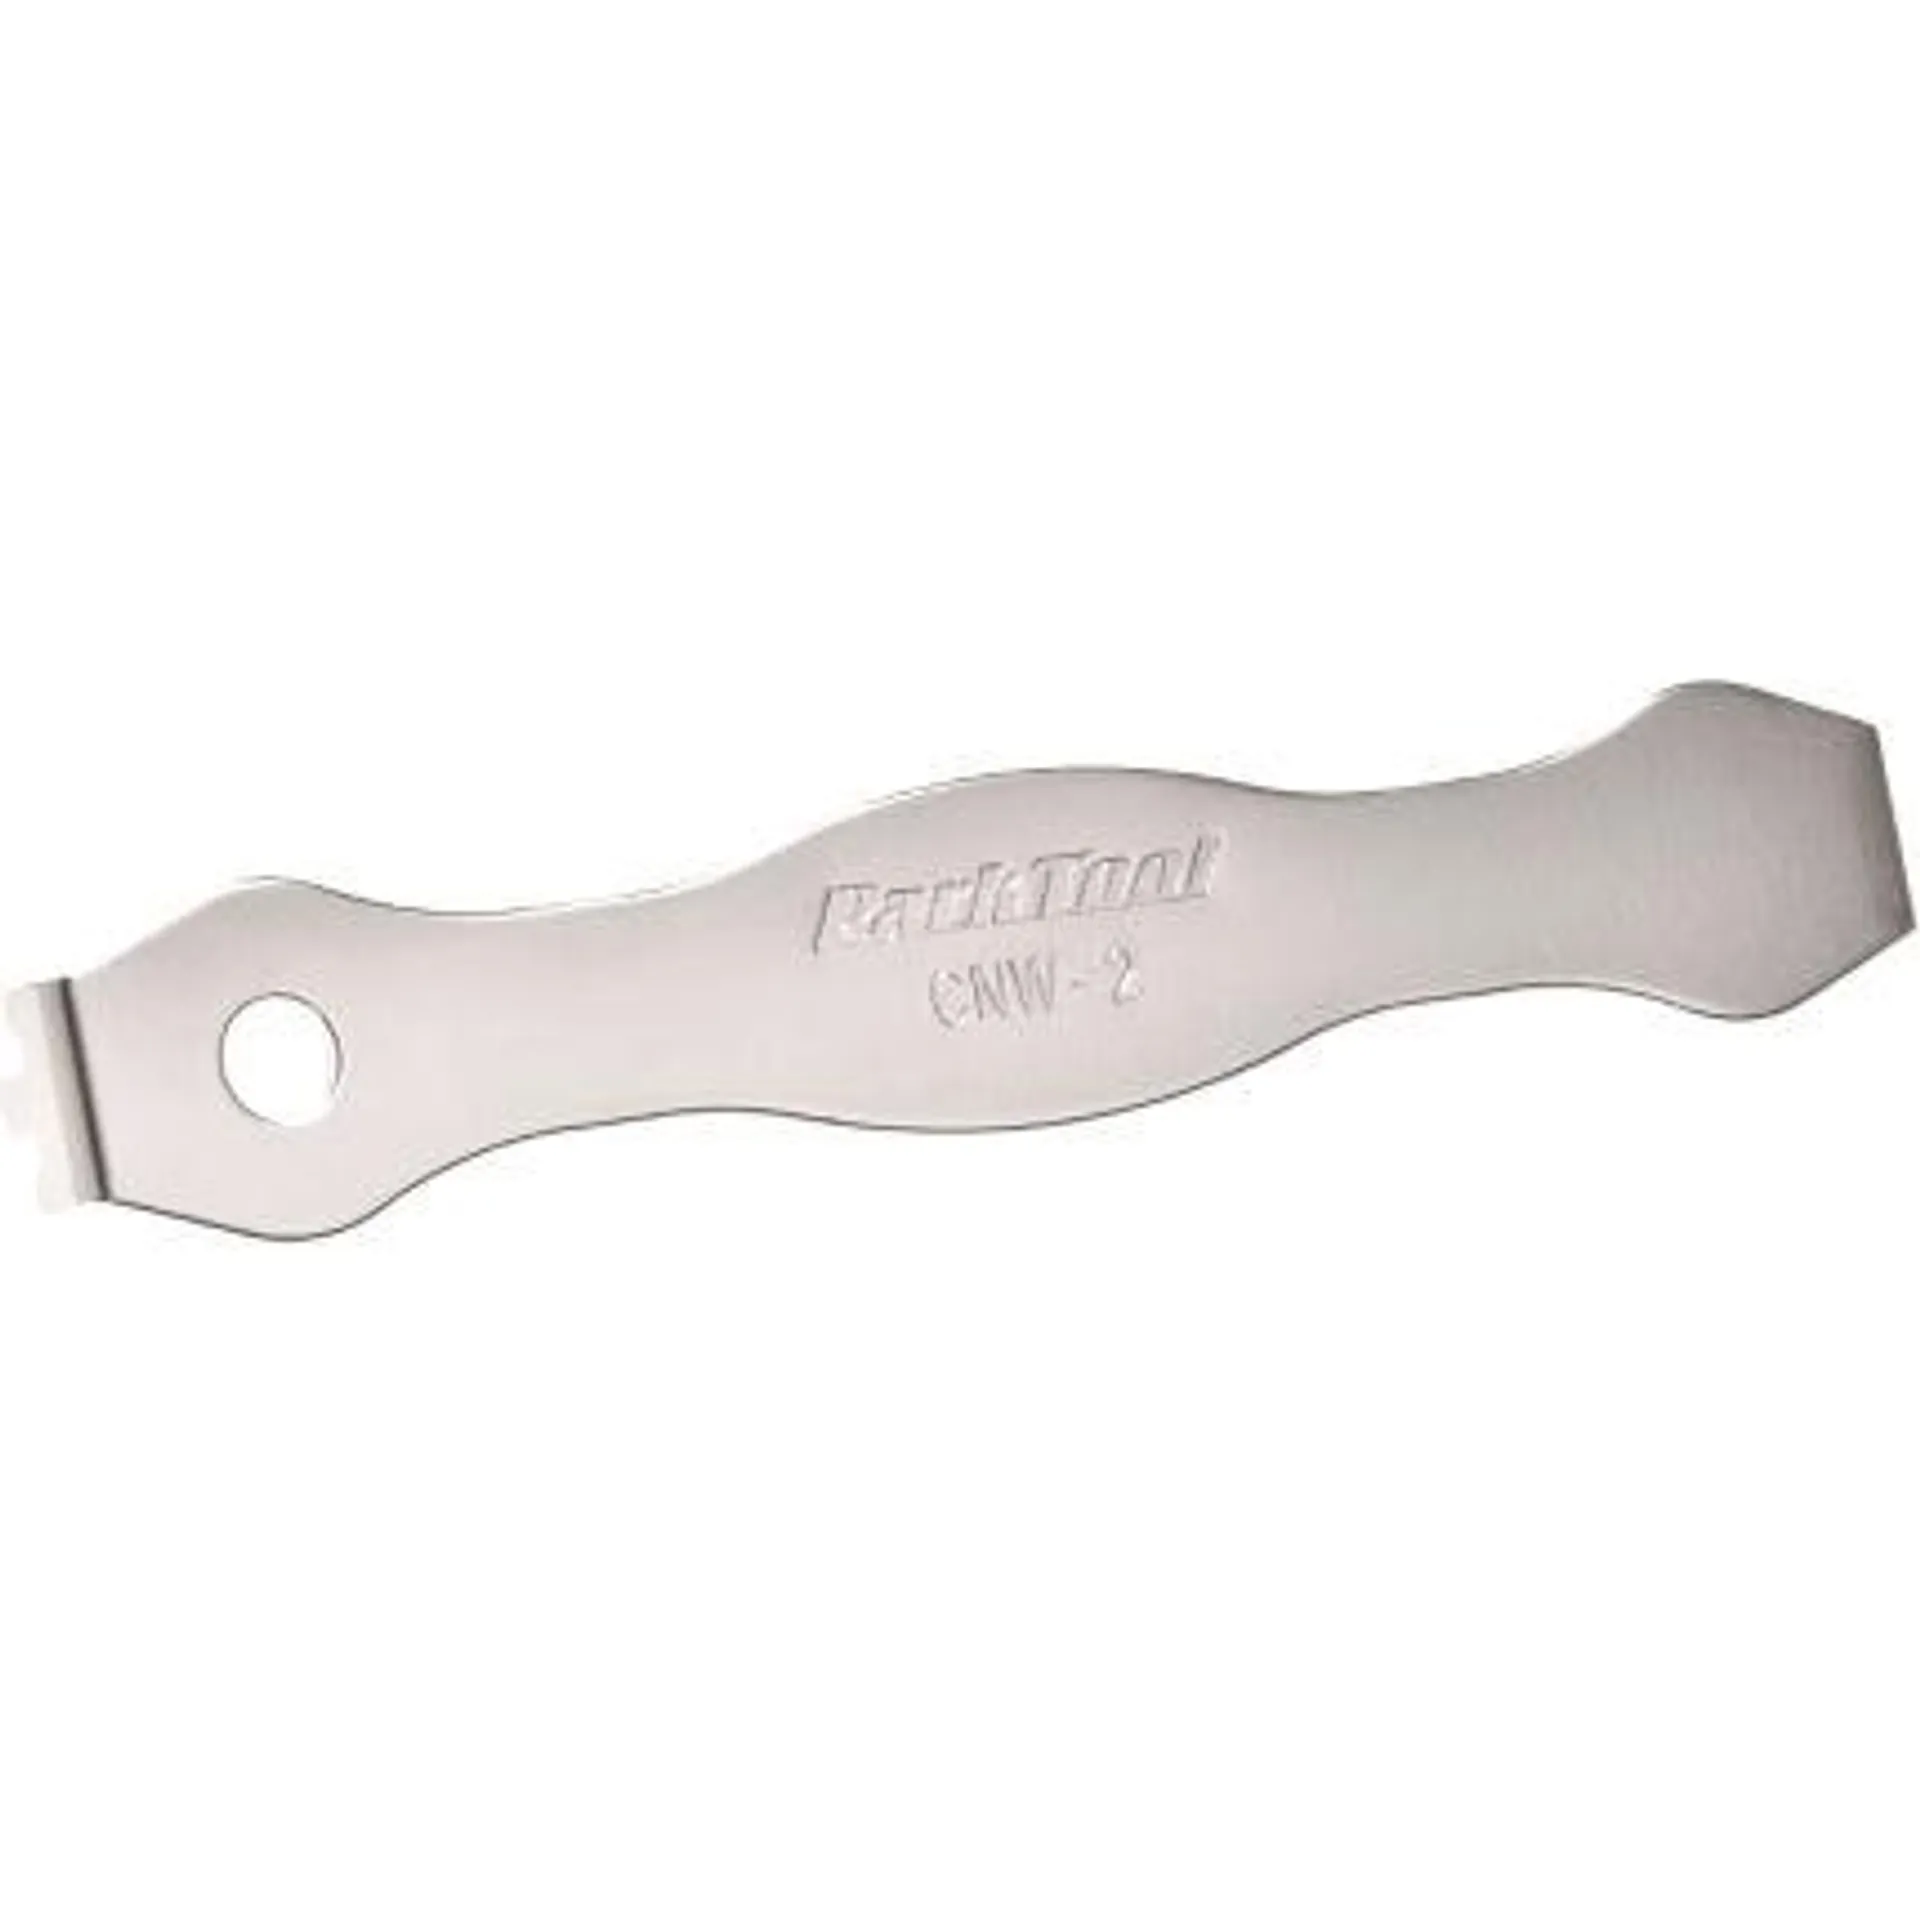 Park Tool Chainring Nut Wrench (CNW2)